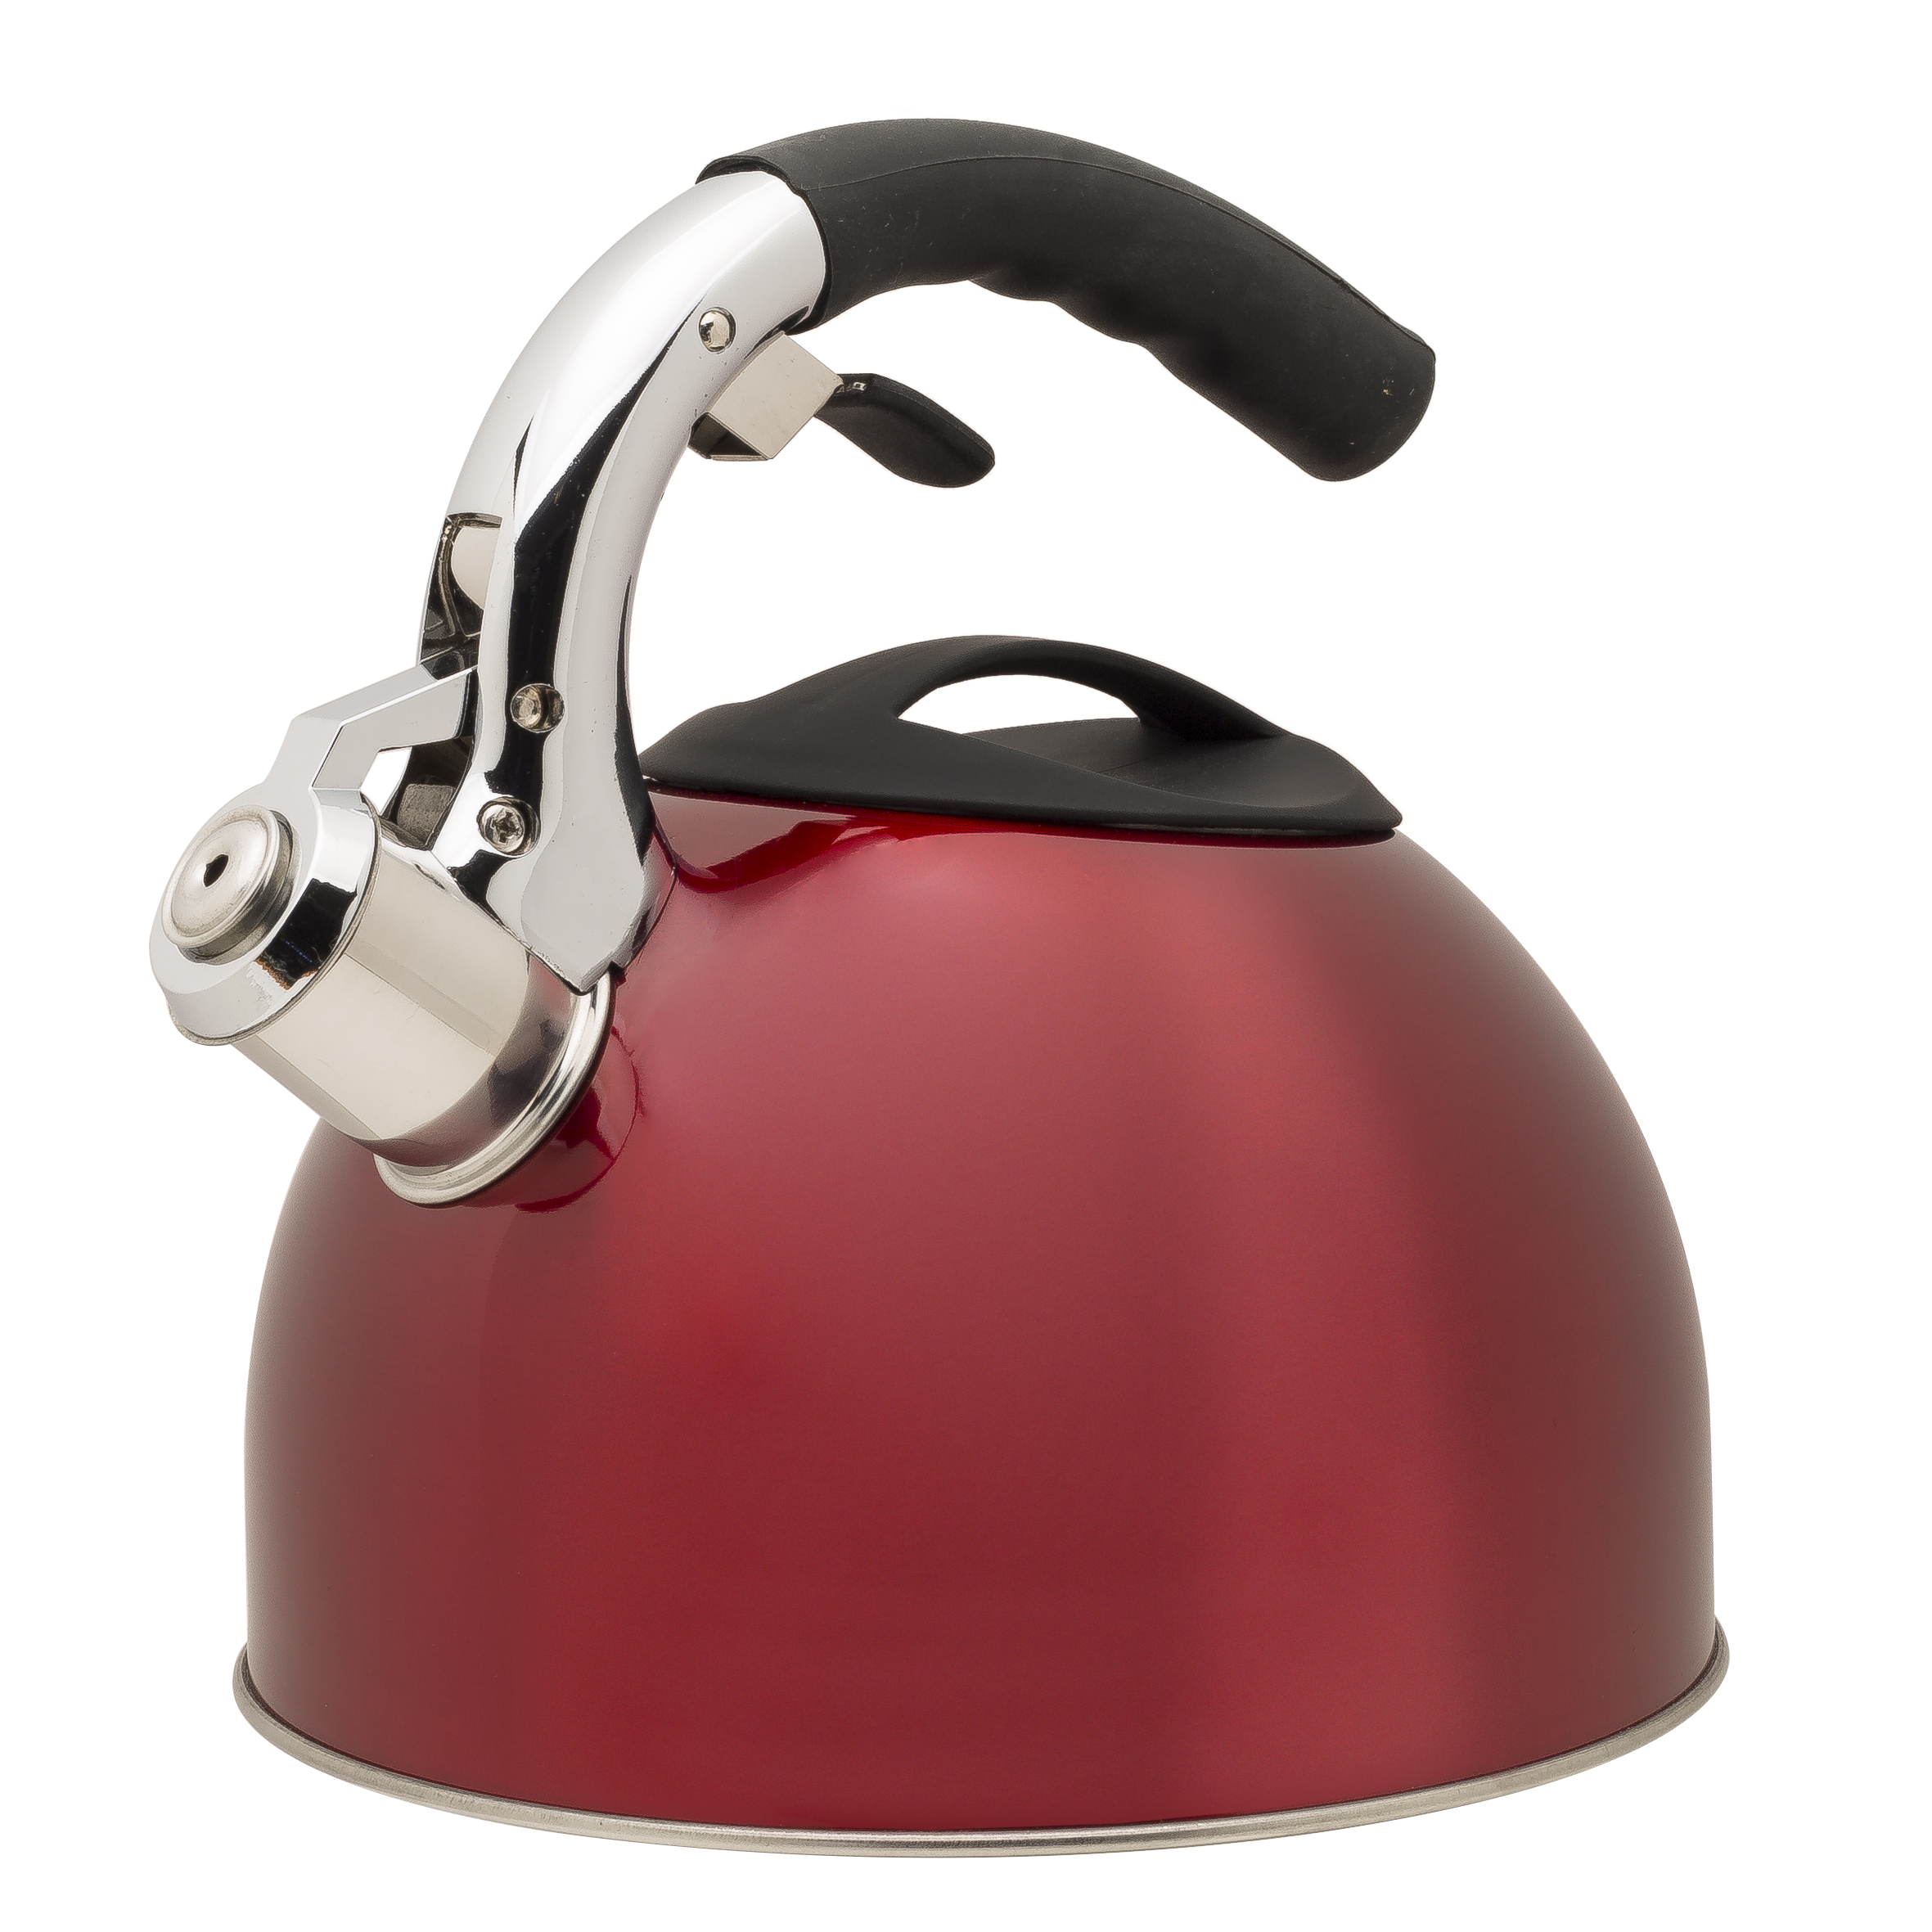 Primula Soft Grip 3 Qt. Stainless Steel Whistling Kettle - Red - image 1 of 8